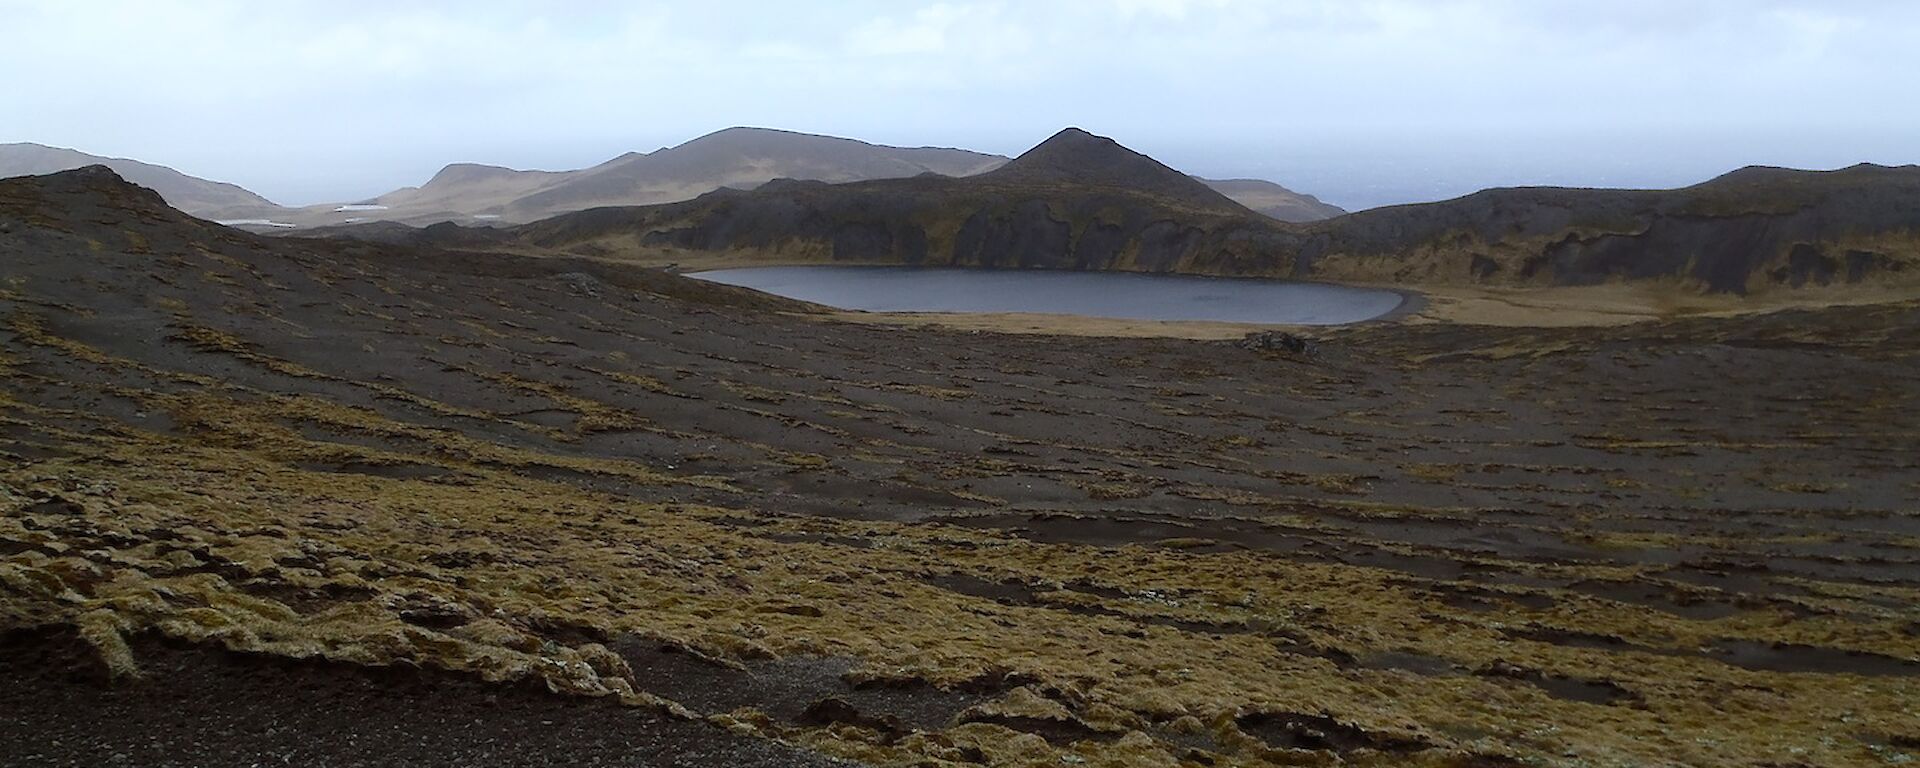 'Moonscape’ of gravel interspersed with ground cover plants above Lake Ifould. There are hills and valleys in the background behind the lake